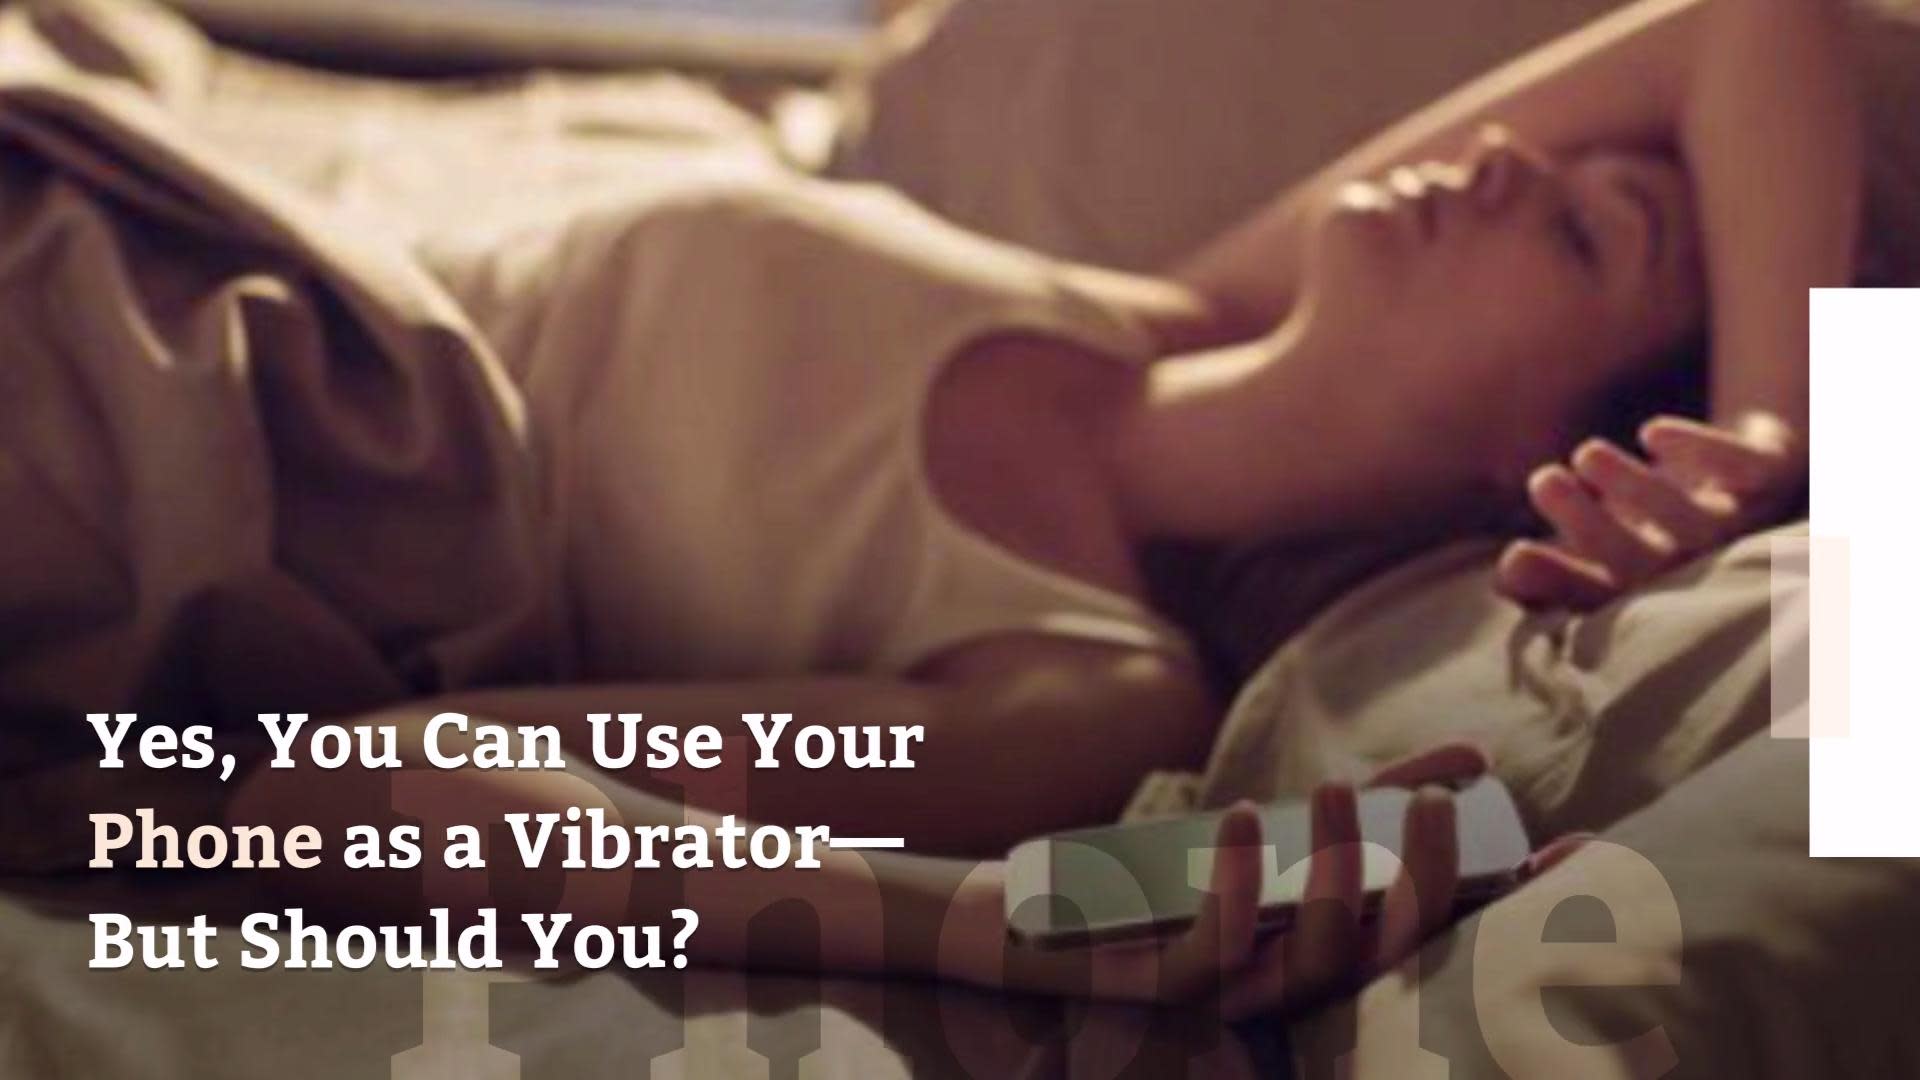 Yes, You Can Use Your Phone as a Vibrator—But Should You? pic